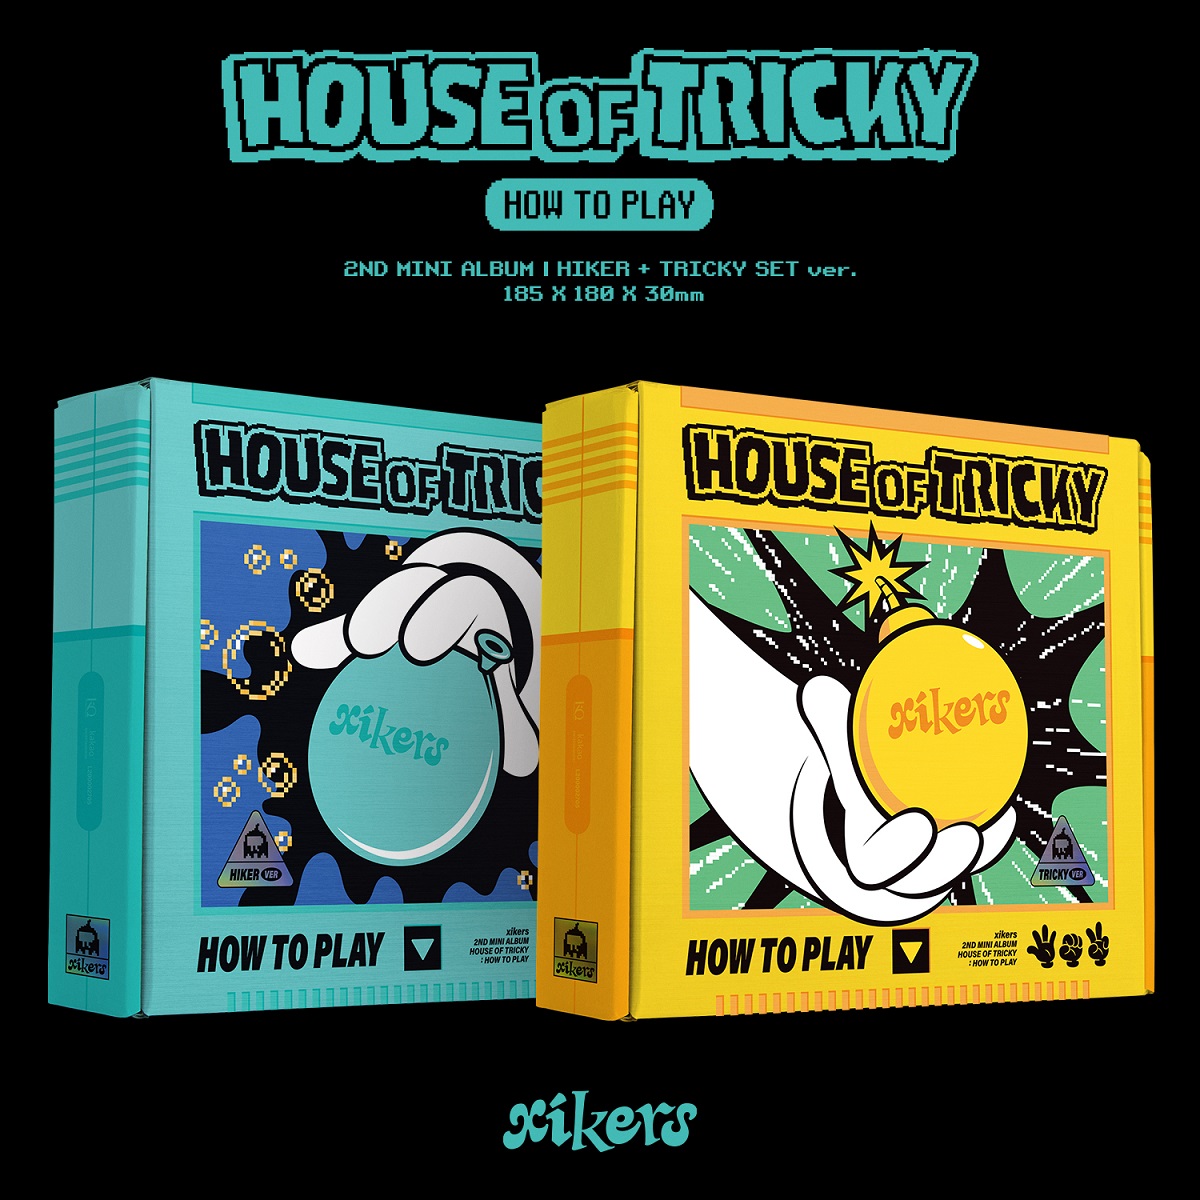 [Video Call Sign Event] [2CD SET] xikers - 2ND MINI ALBUM [HOUSE OF TRICKY : HOW TO PLAY] (HIKER Ver. + TRICKY Ver.)